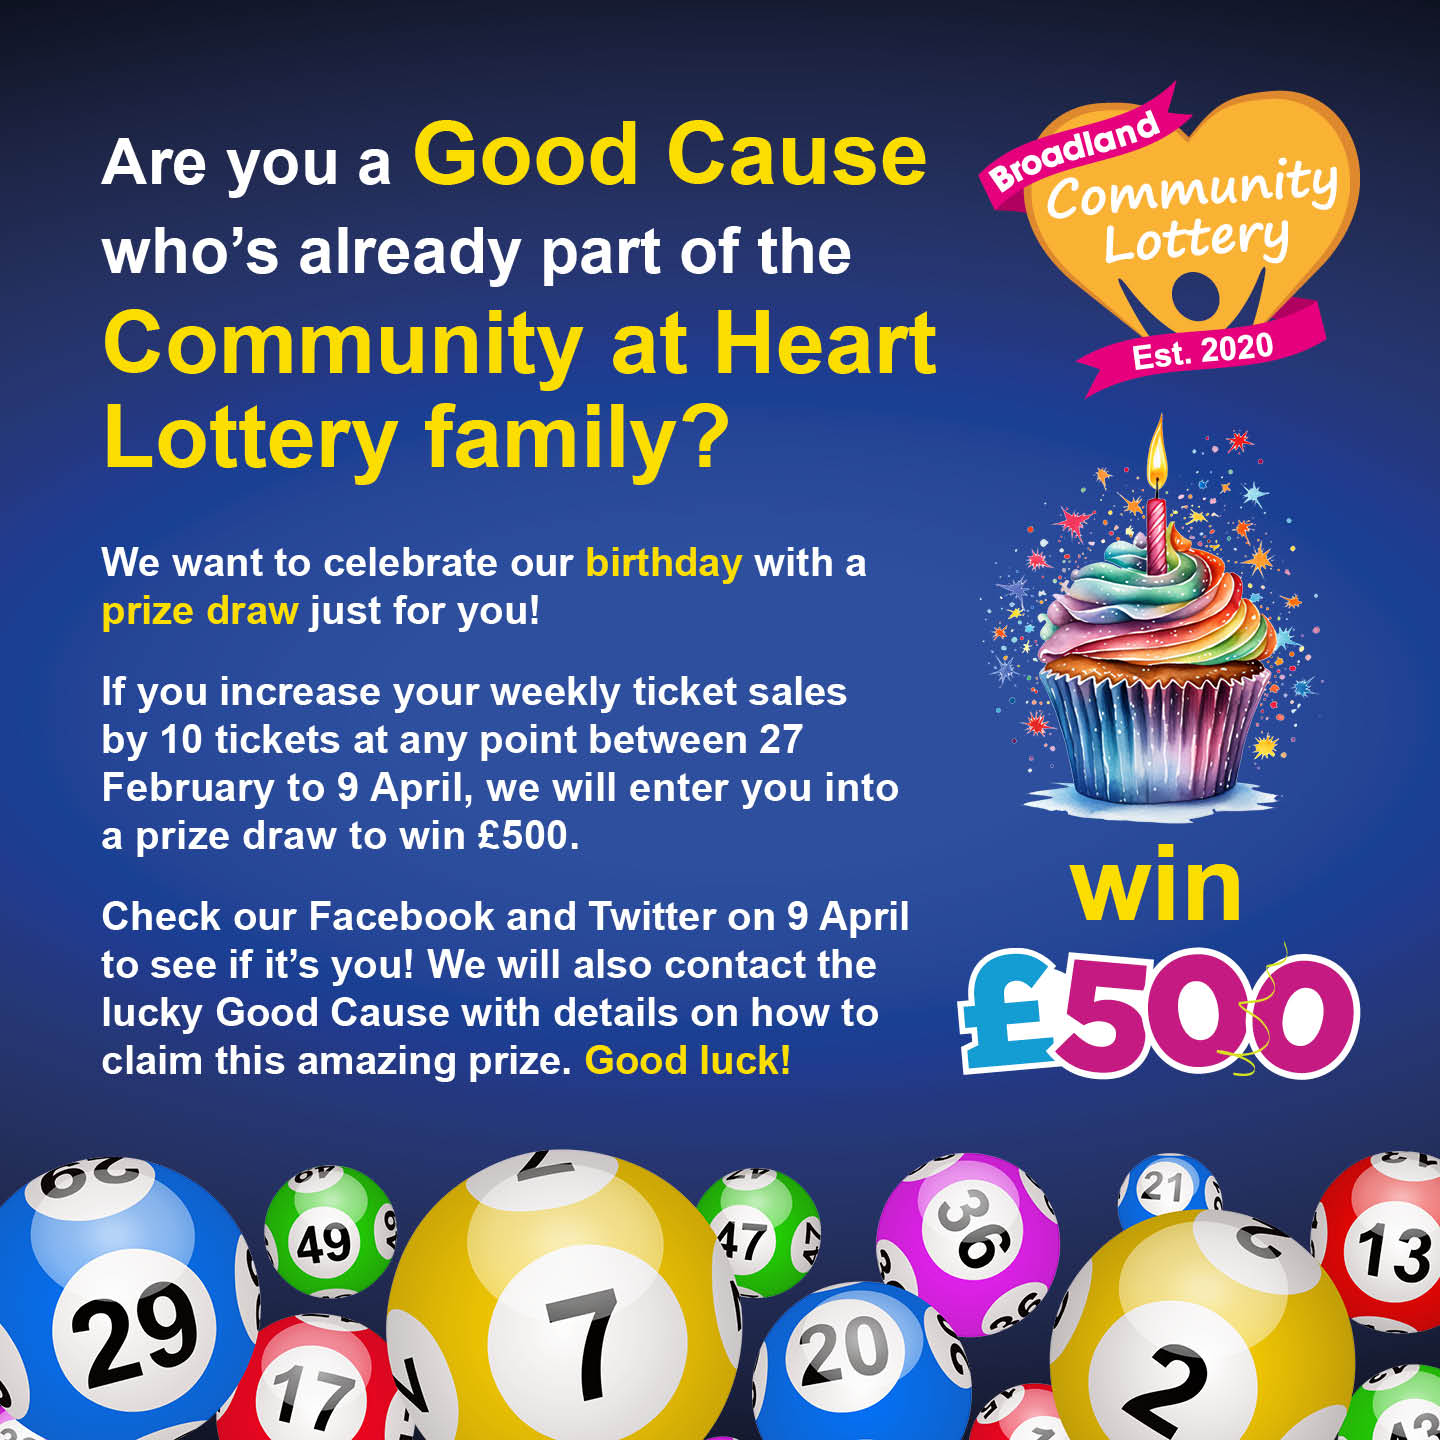 Wording says prize draw to win £500